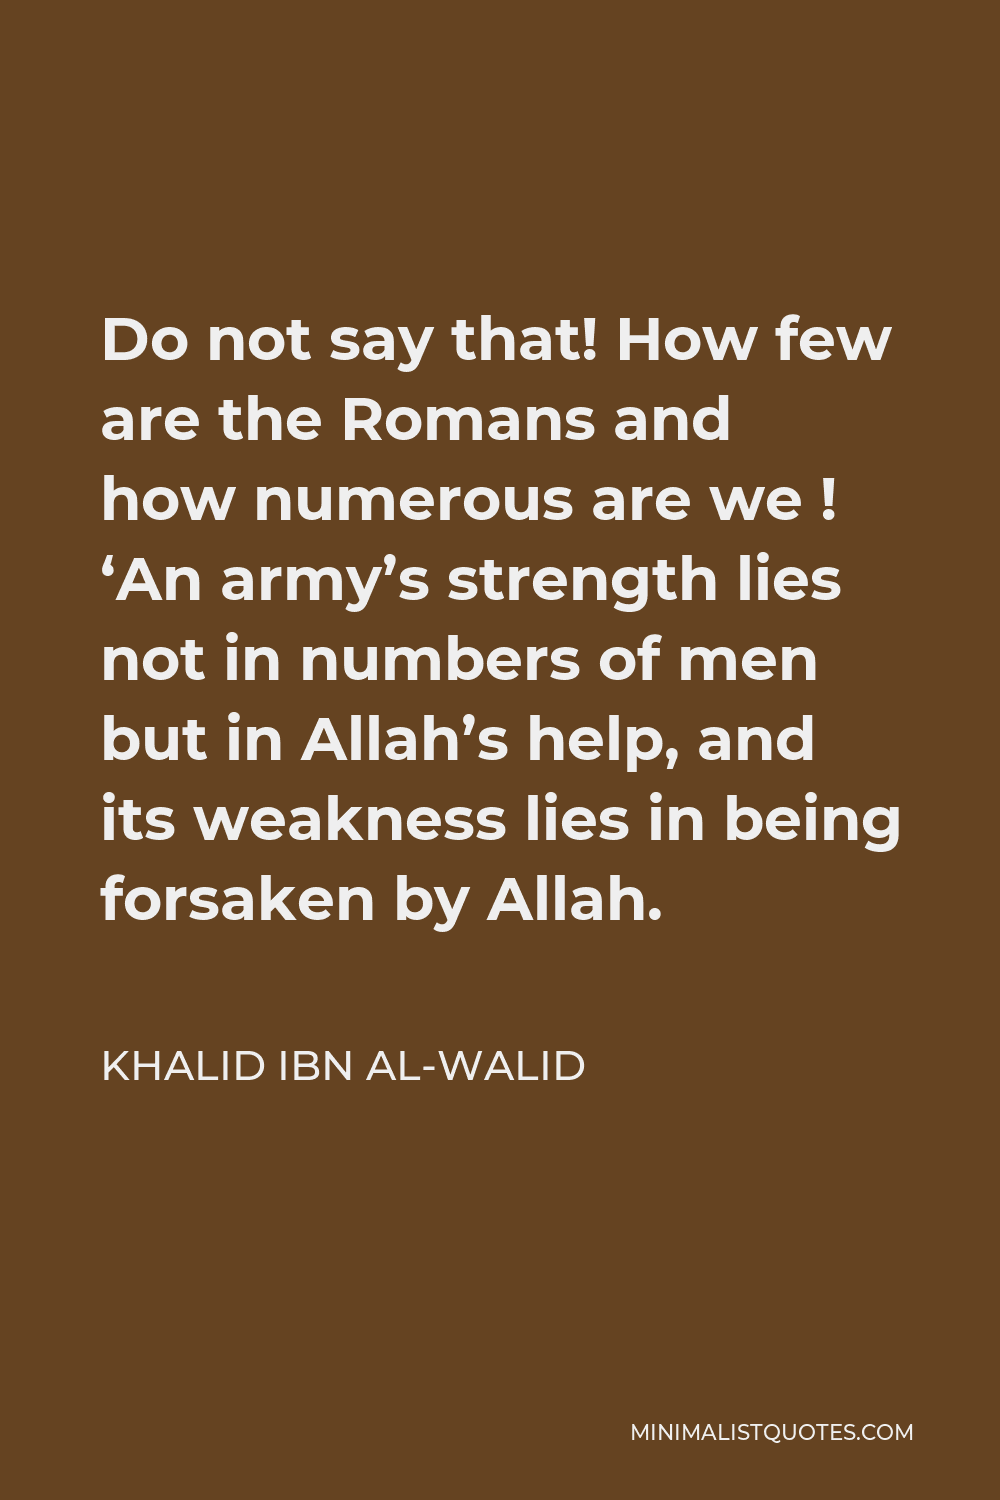 Khalid ibn al-Walid Quote - Do not say that! How few are the Romans and how numerous are we ! ‘An army’s strength lies not in numbers of men but in Allah’s help, and its weakness lies in being forsaken by Allah.